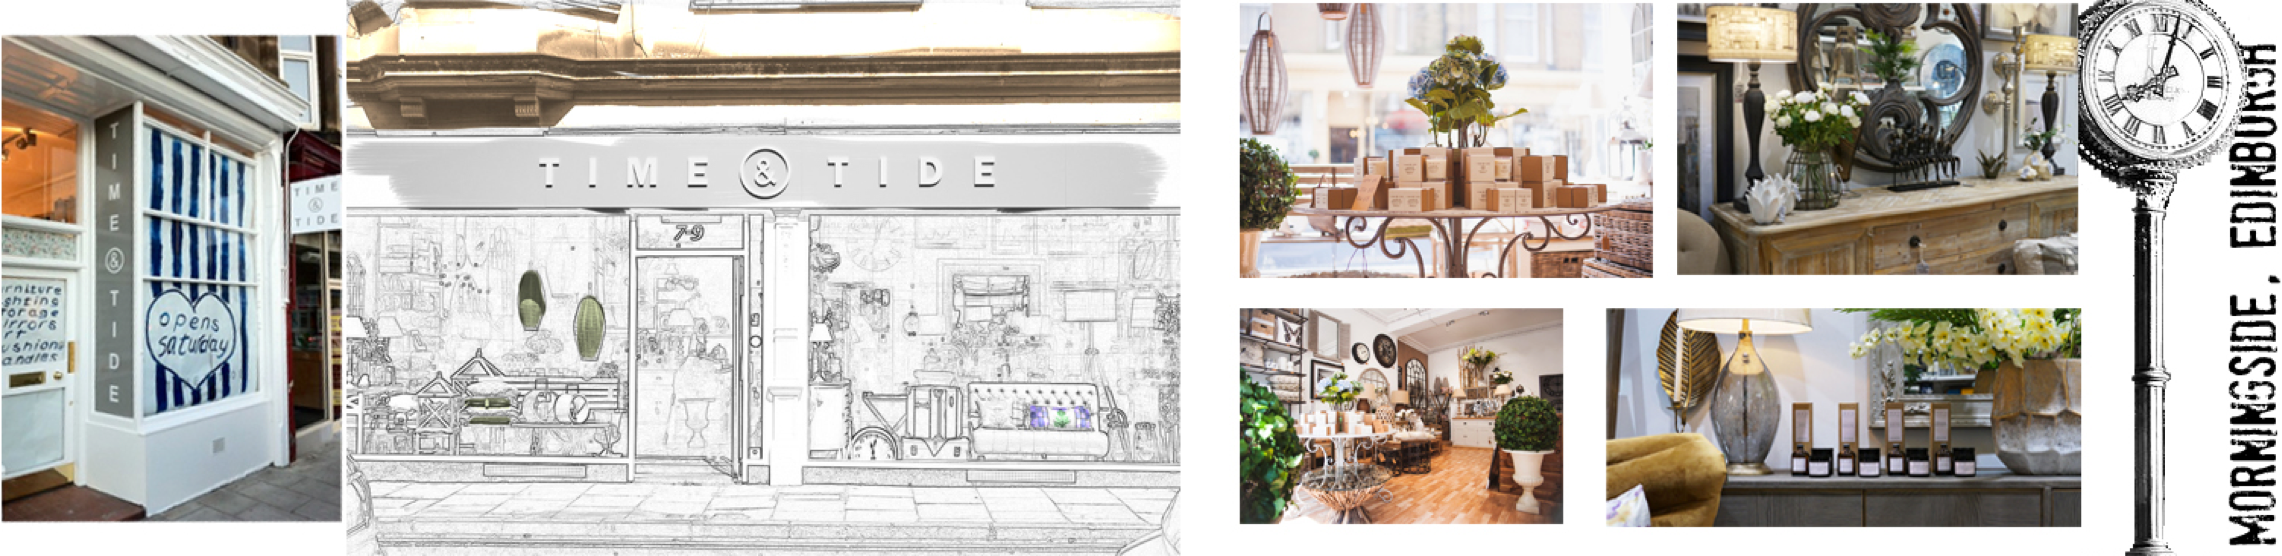 collage of images showing Morningside, Edinburgh store with internal shop photography of candles and accessories